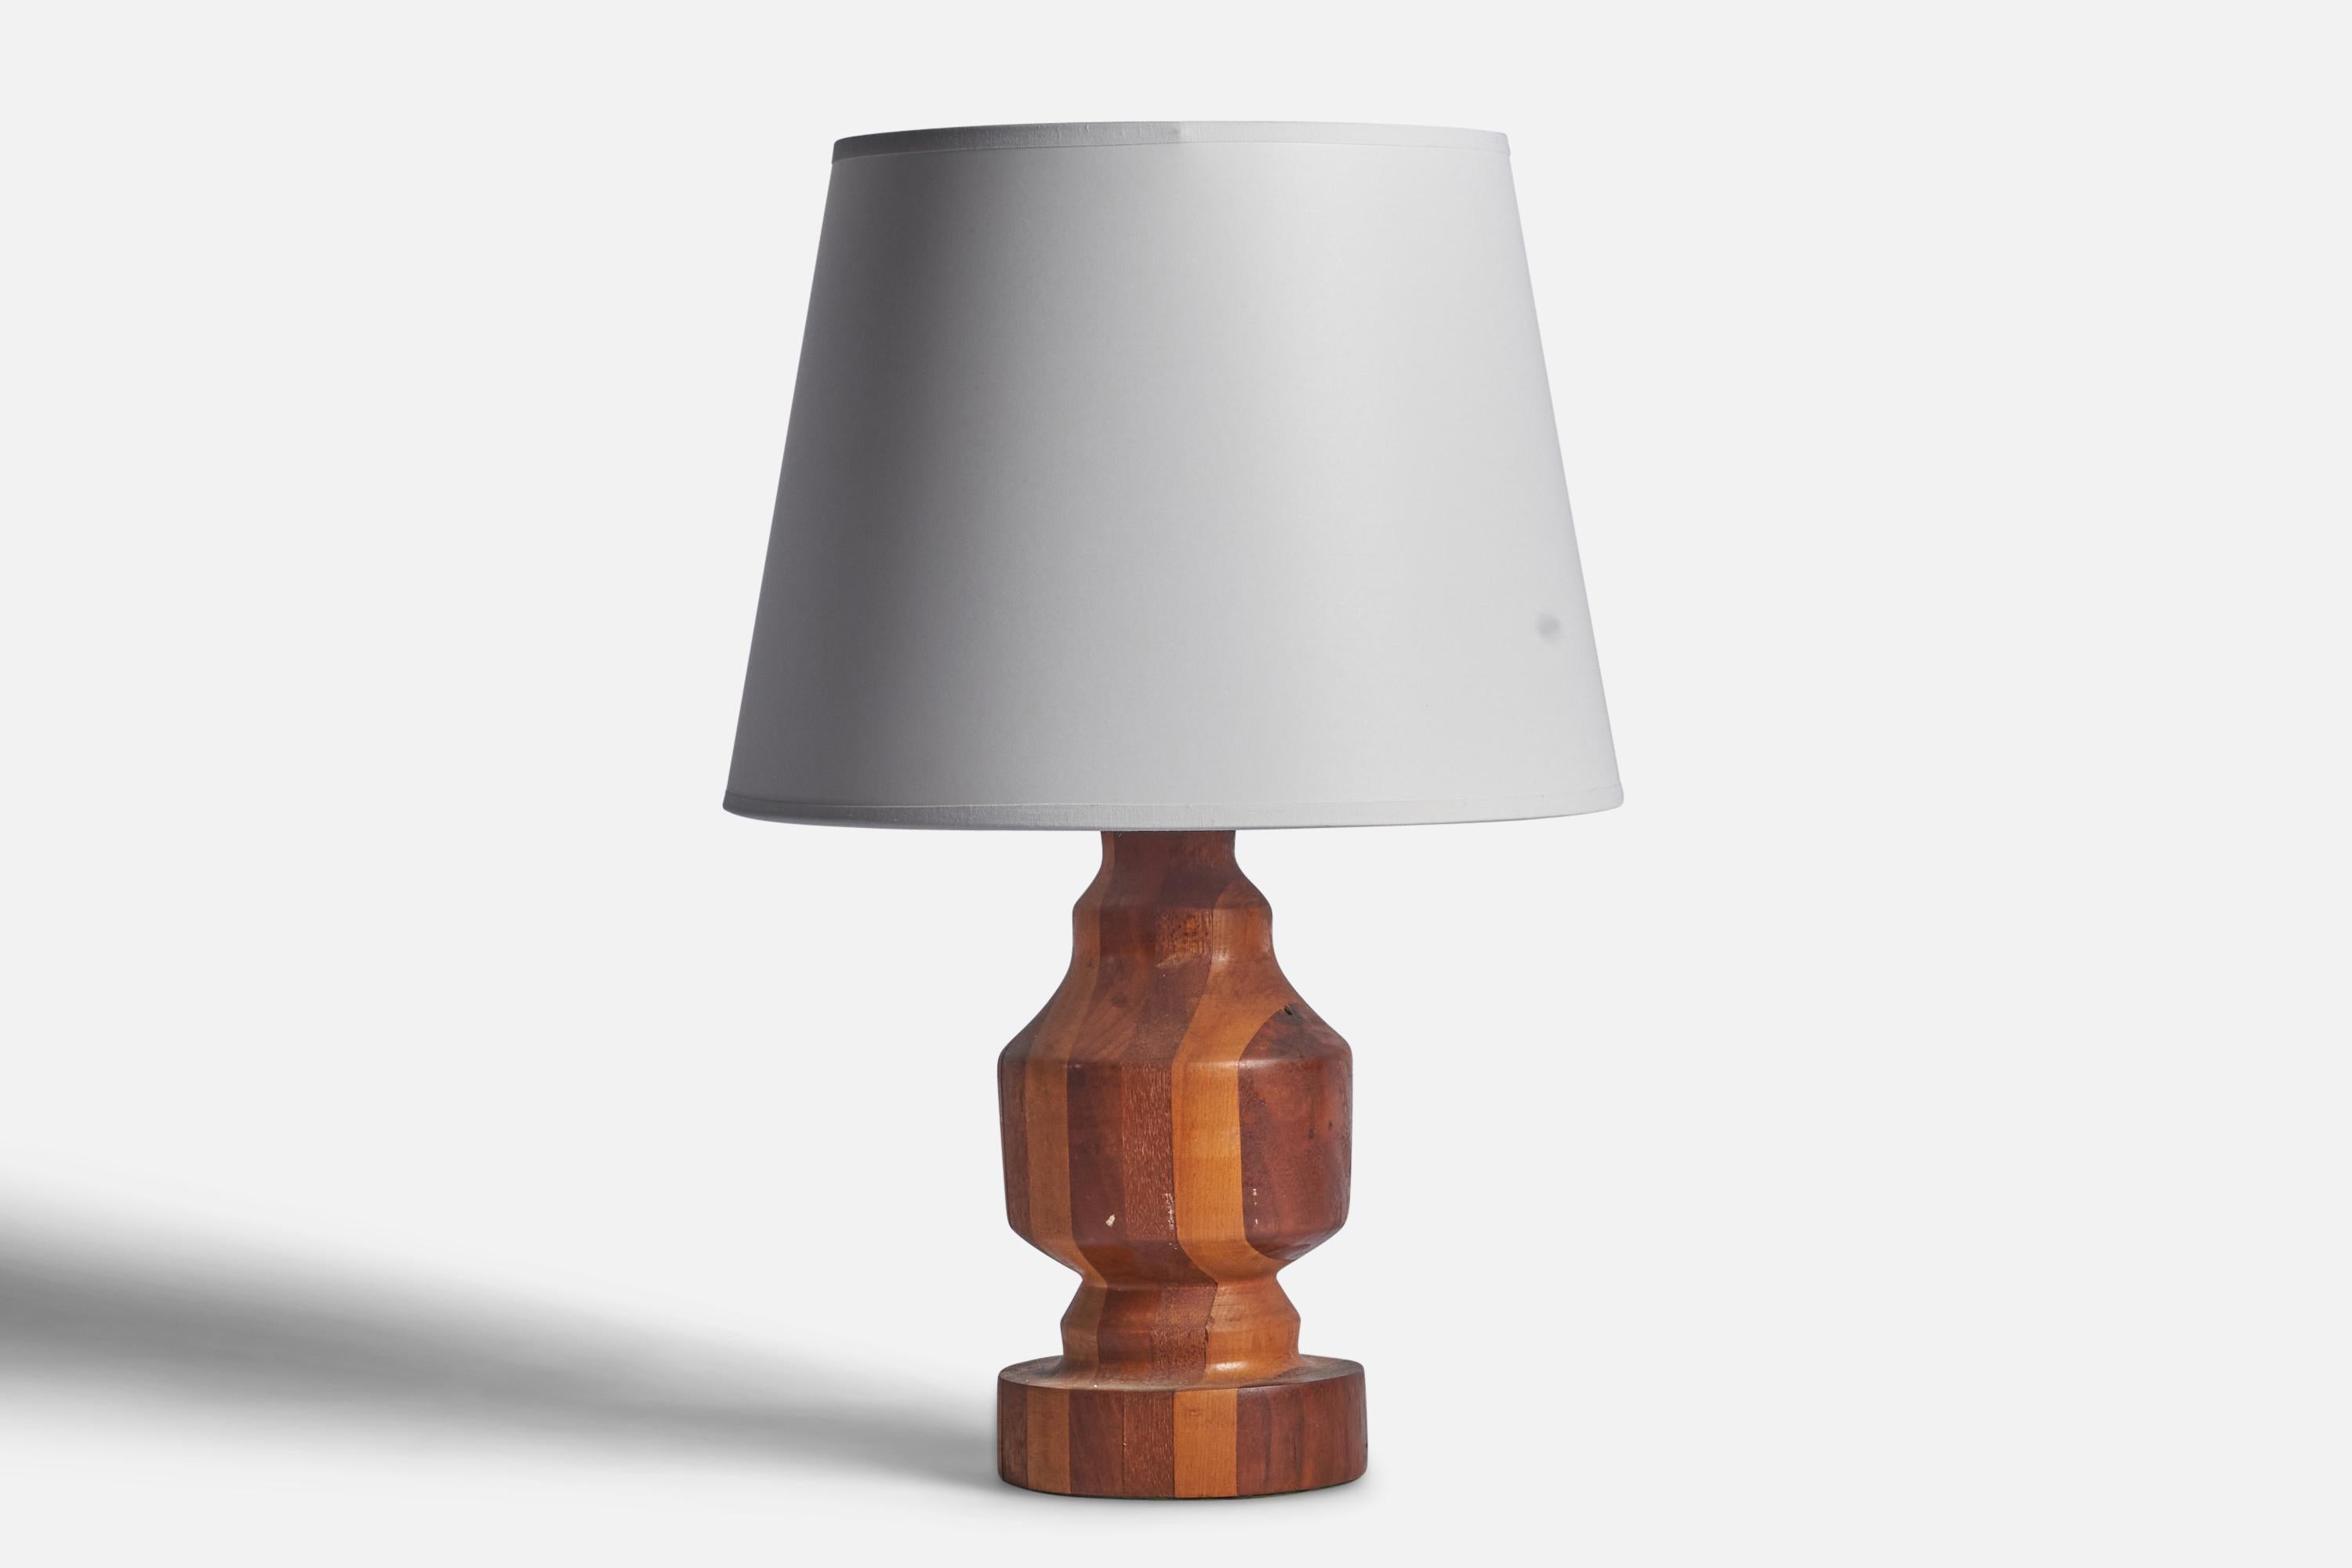 A stack-laminated wood table lamp designed and produced in Denmark, c. 1950s.

Dimensions of Lamp (inches): 12.5” H x 5” Diameter
Dimensions of Shade (inches): 8.75” Top Diameter x 12” Bottom Diameter x 9” H 
Dimensions of Lamp with Shade (inches):